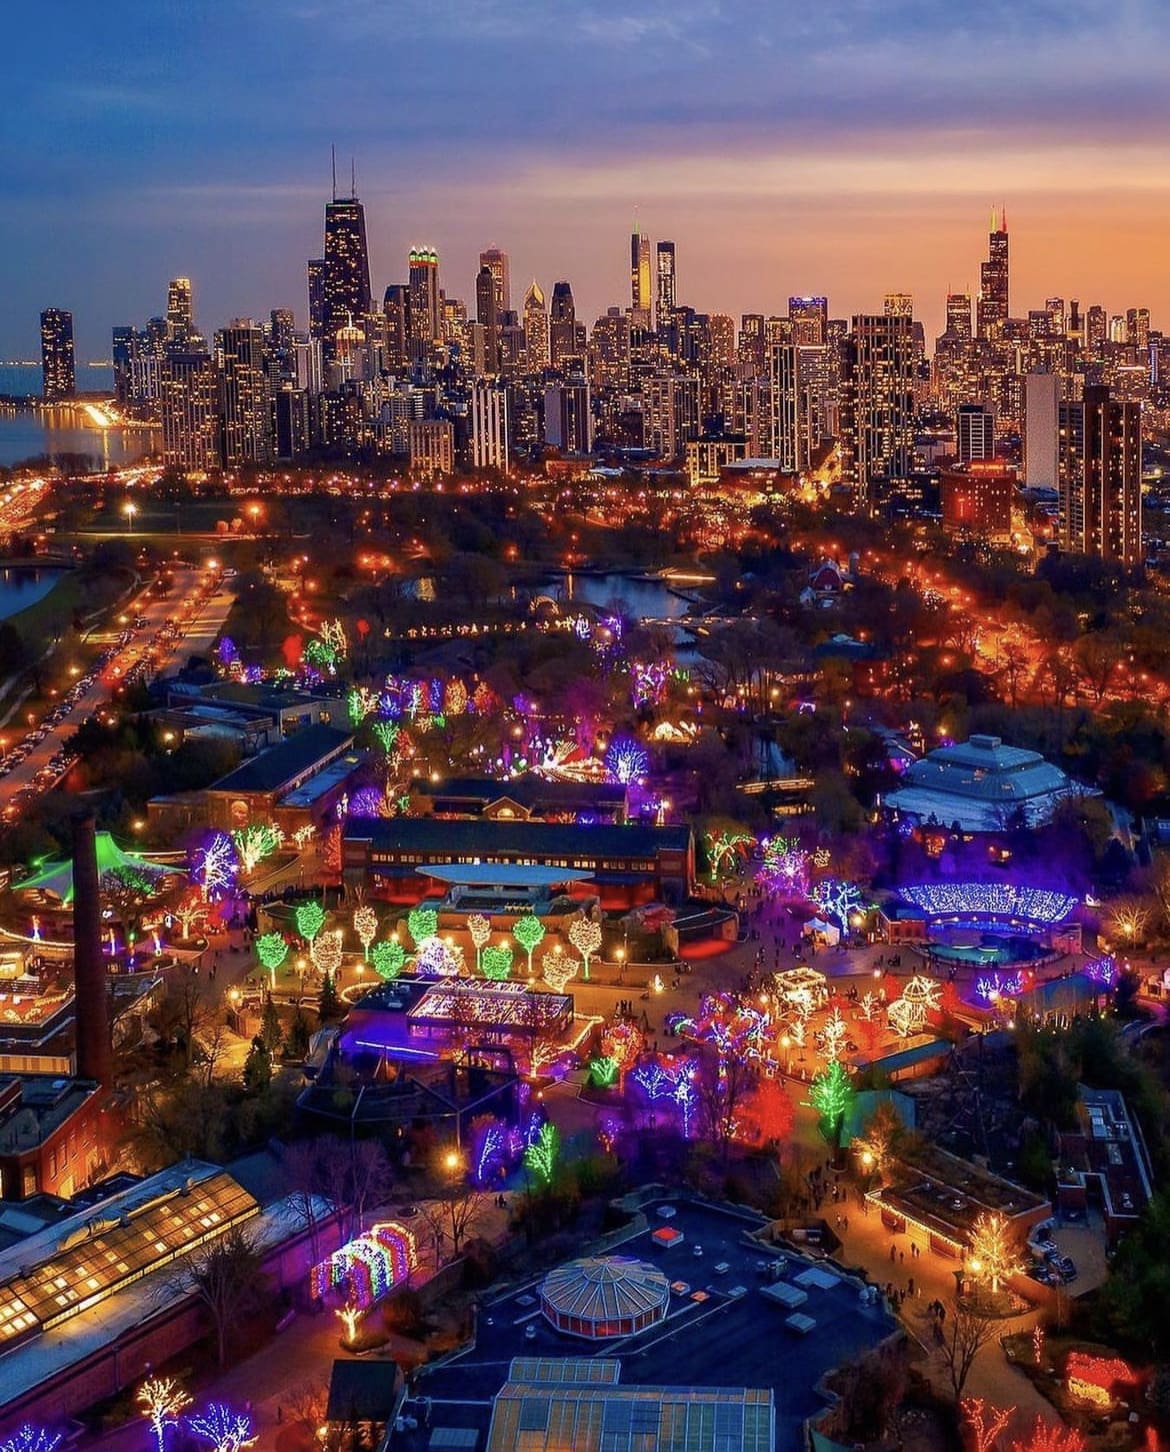 Lincoln Park Zoo Lights - The 20 Best Things to Do in Chicago in Winter